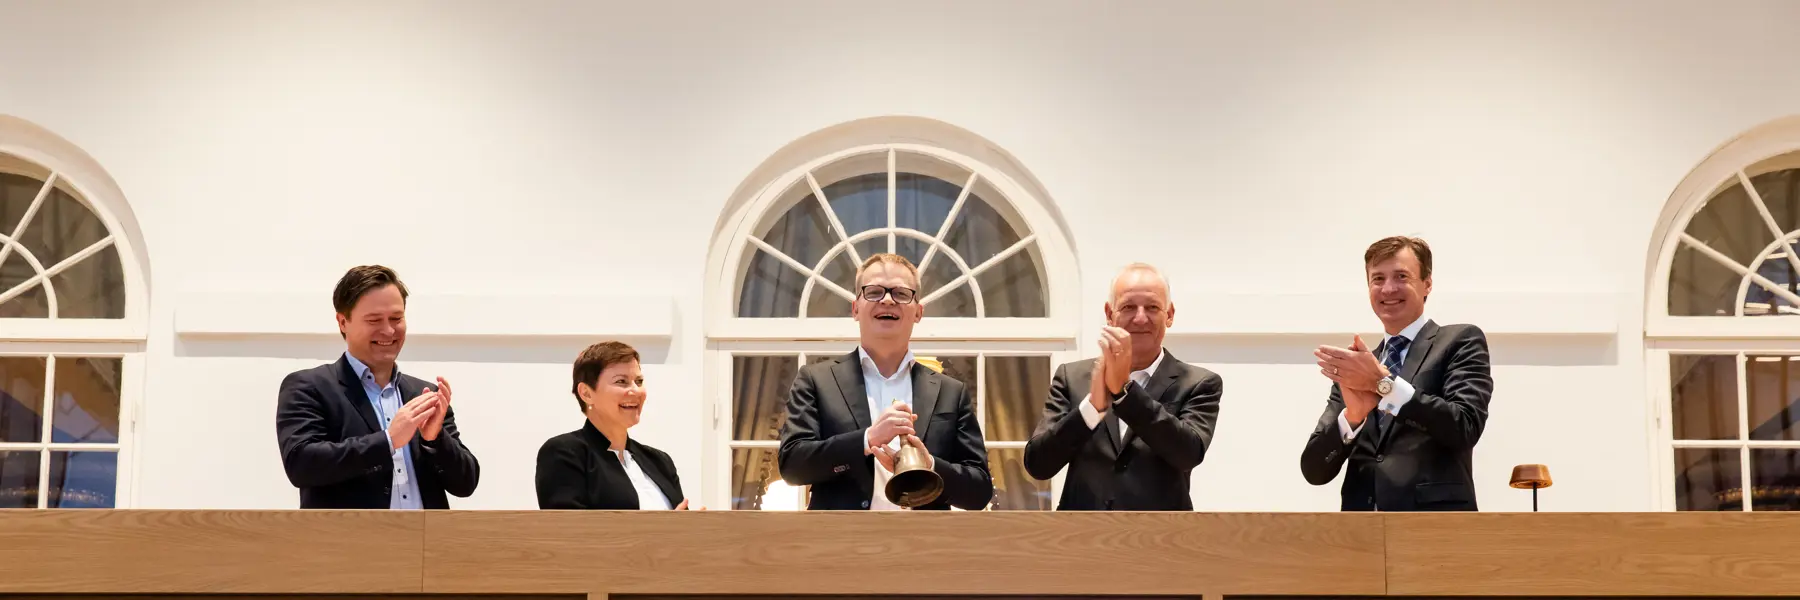 Beerenberg had its first day on the Oslo Stock Exchange on 5 October 2023.